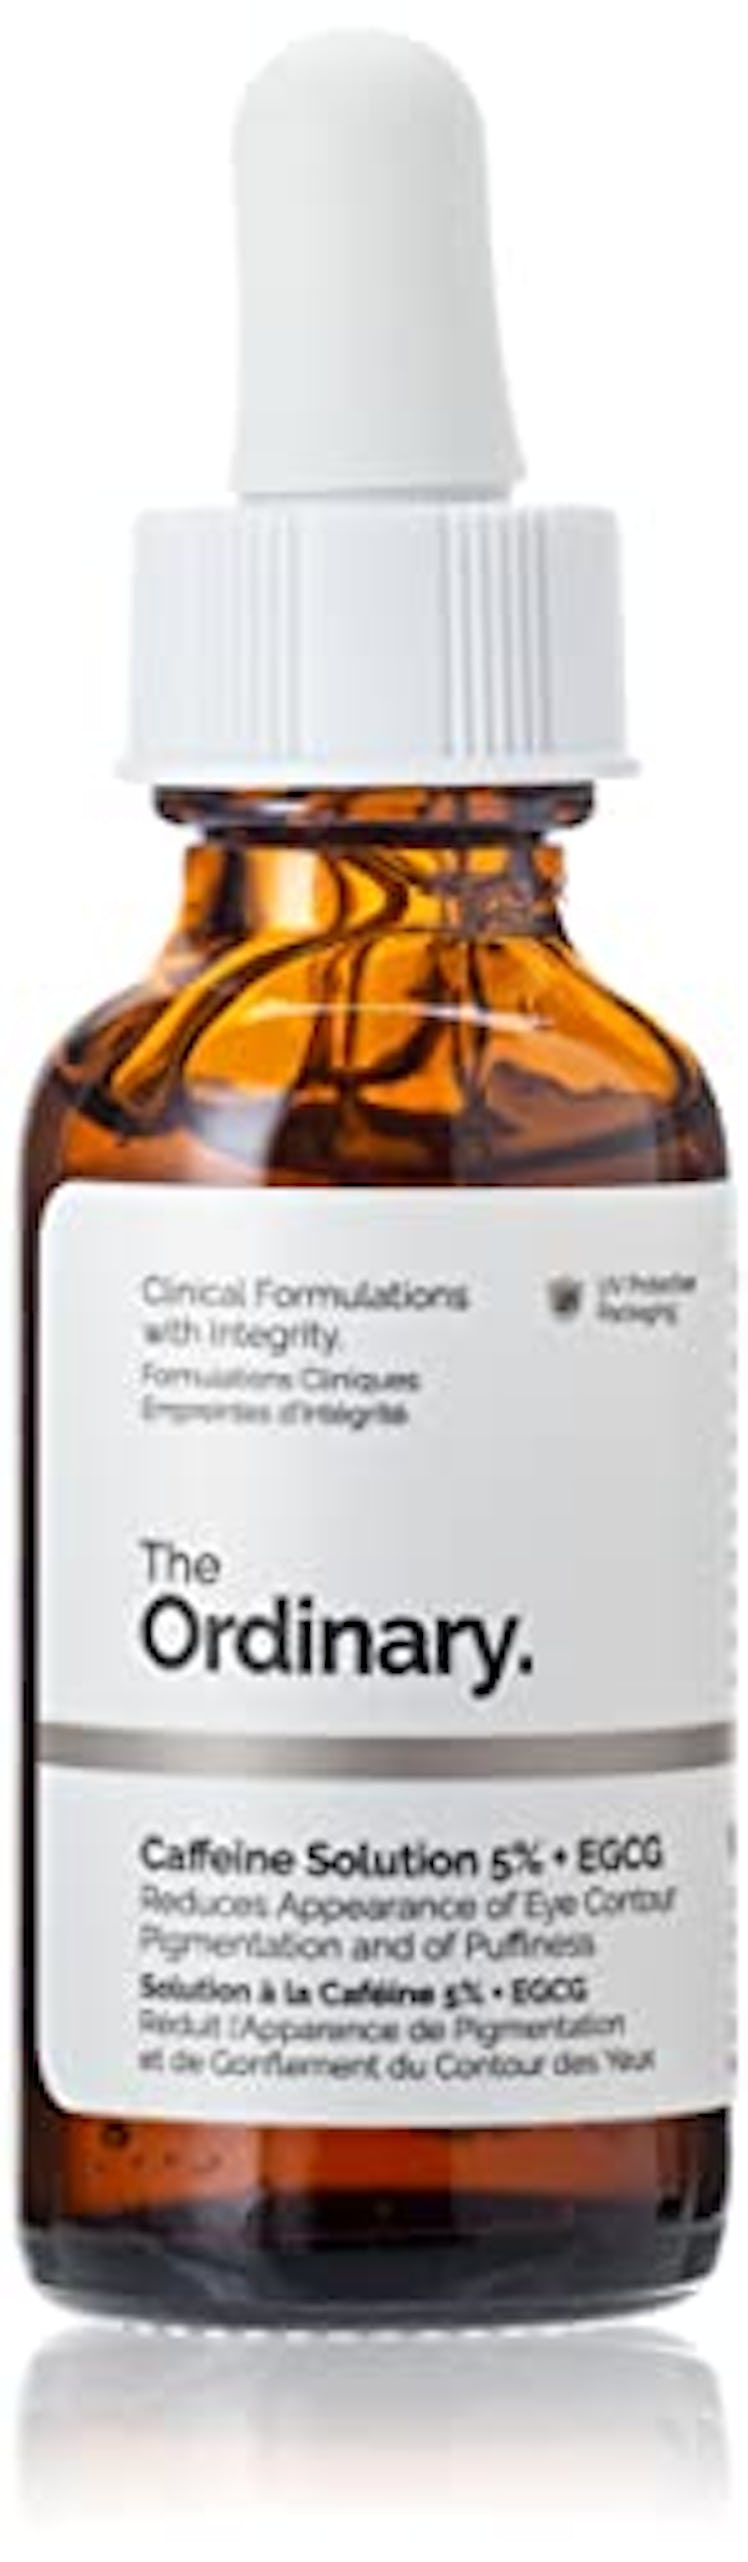 Caffeine Solution by The Ordinary